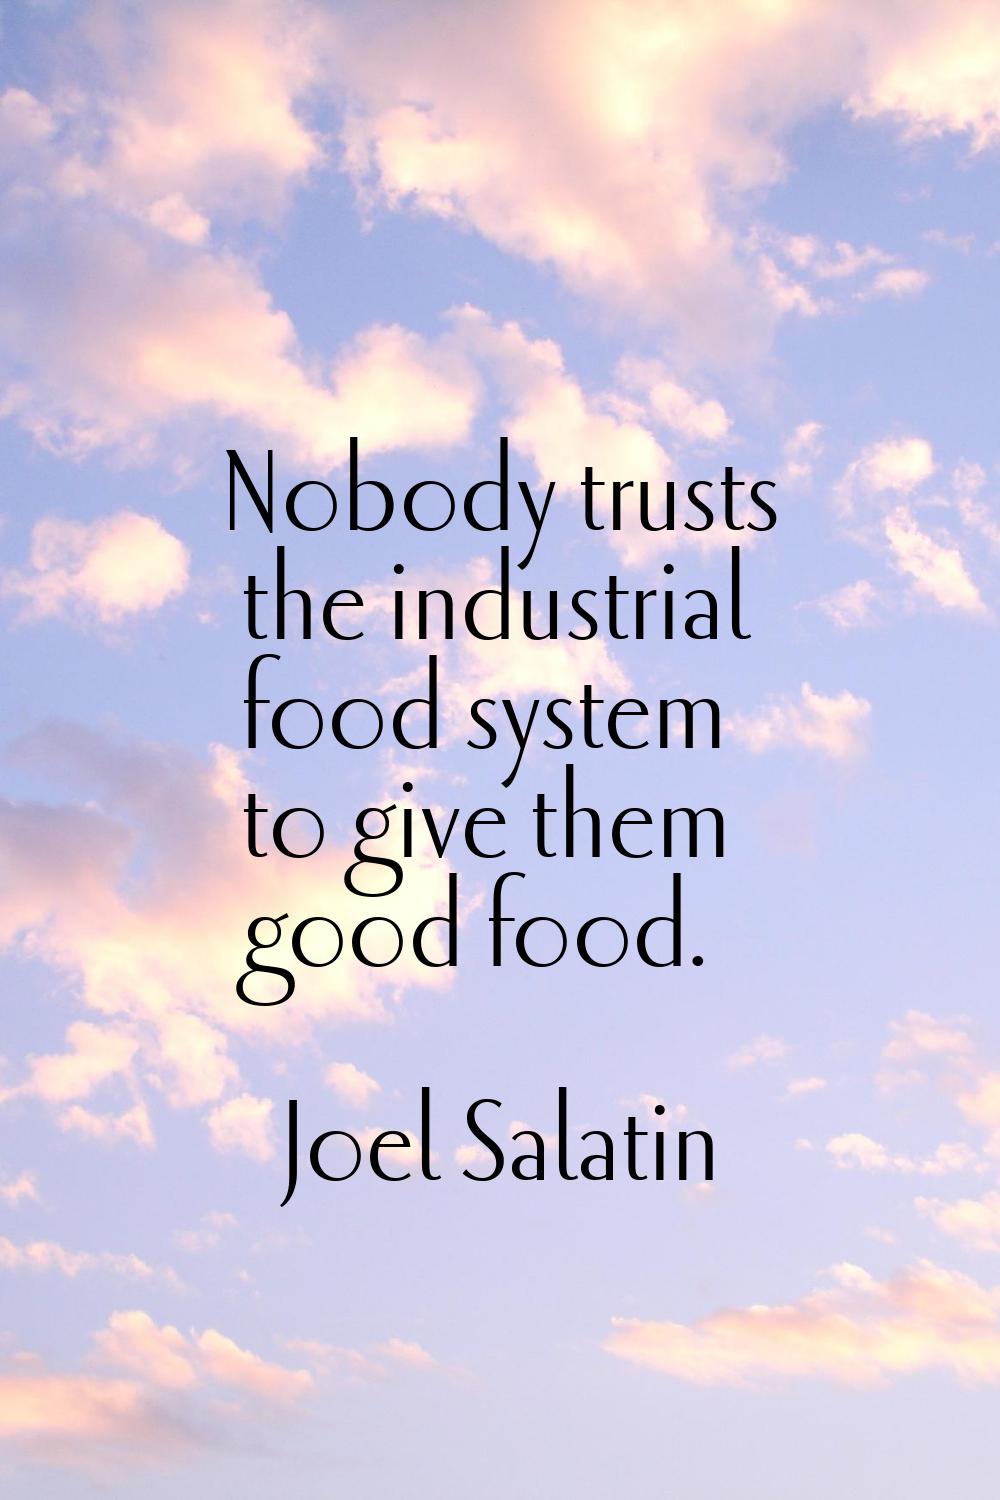 Nobody trusts the industrial food system to give them good food.